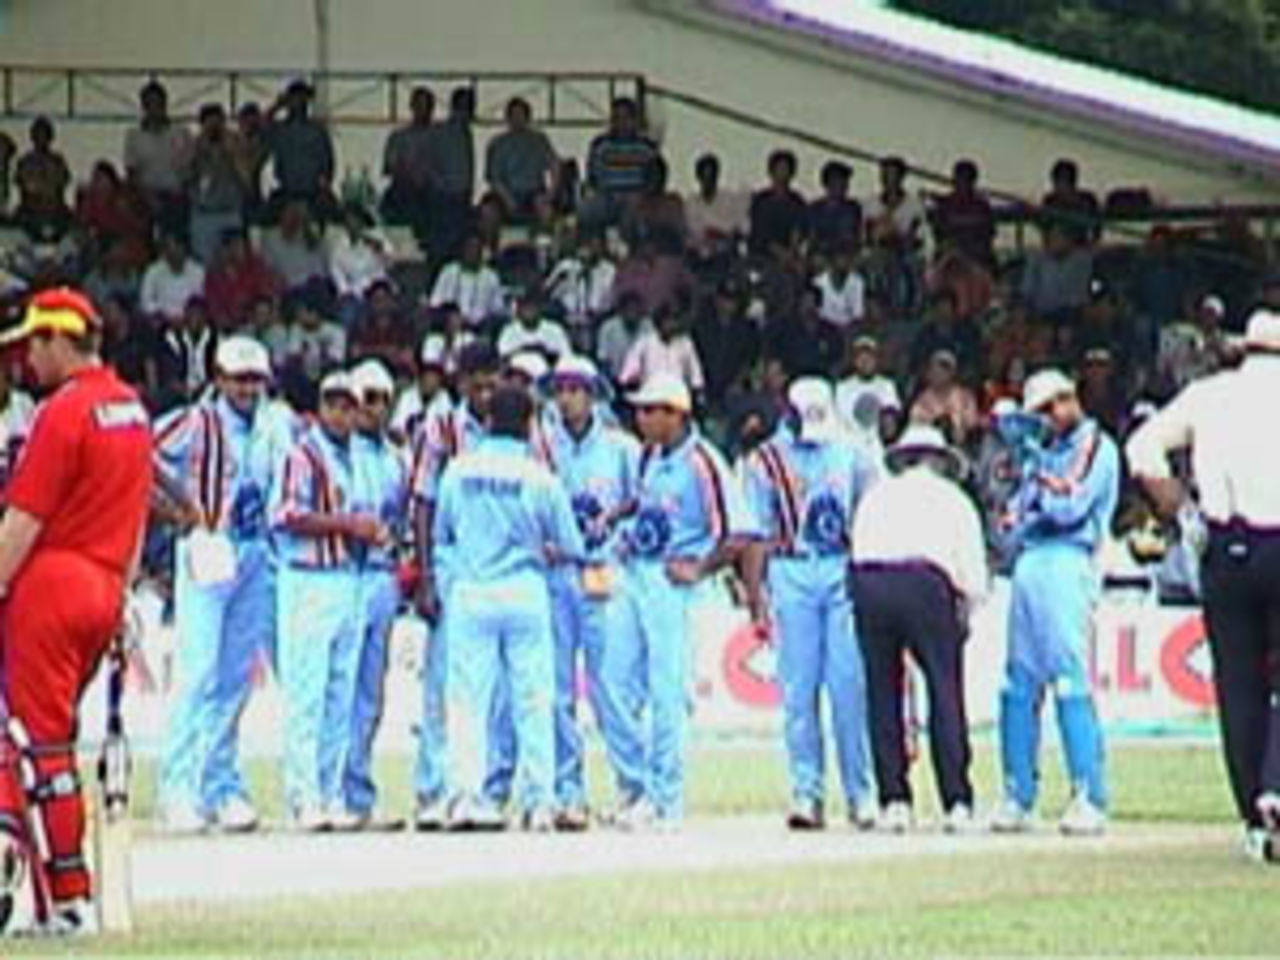 Yet another wicket falls, Campbell is watching the demise in a helpless manner while the Indians celebrate, India v Zimbabwe (2nd ODI), Coca-Cola Singapore Challenge, 1999-2000, Kallang Ground, Singapore, 4 Sep 1999